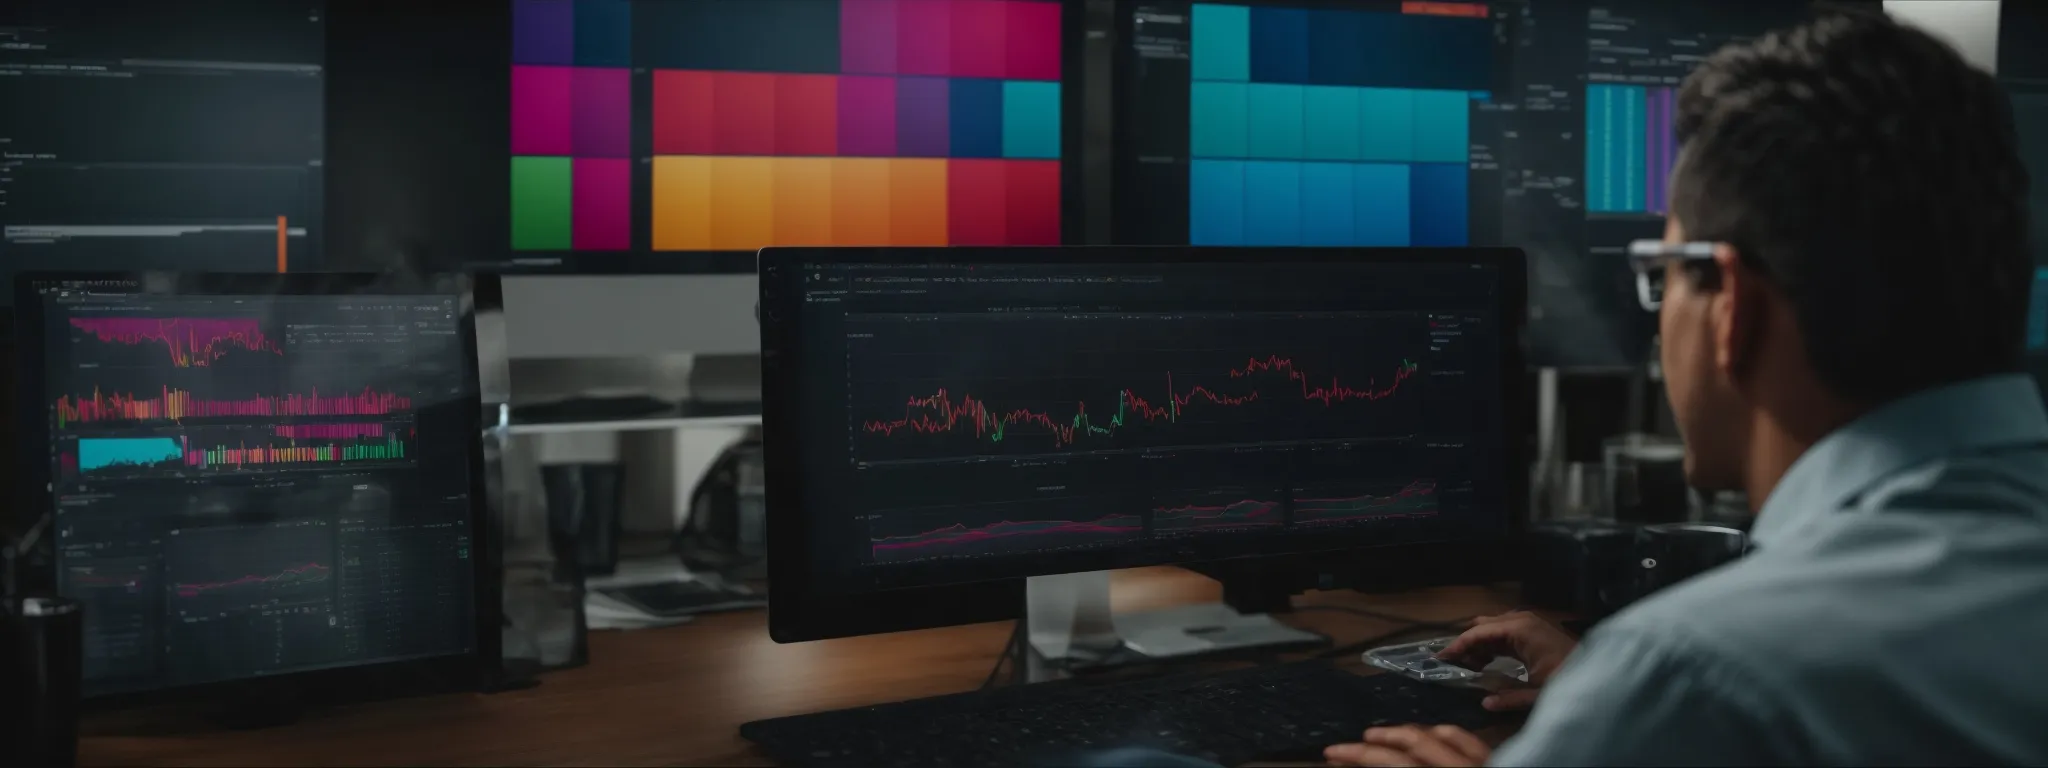 a marketer analyzing colorful graphs and charts on a computer screen that reflect keyword performance metrics.